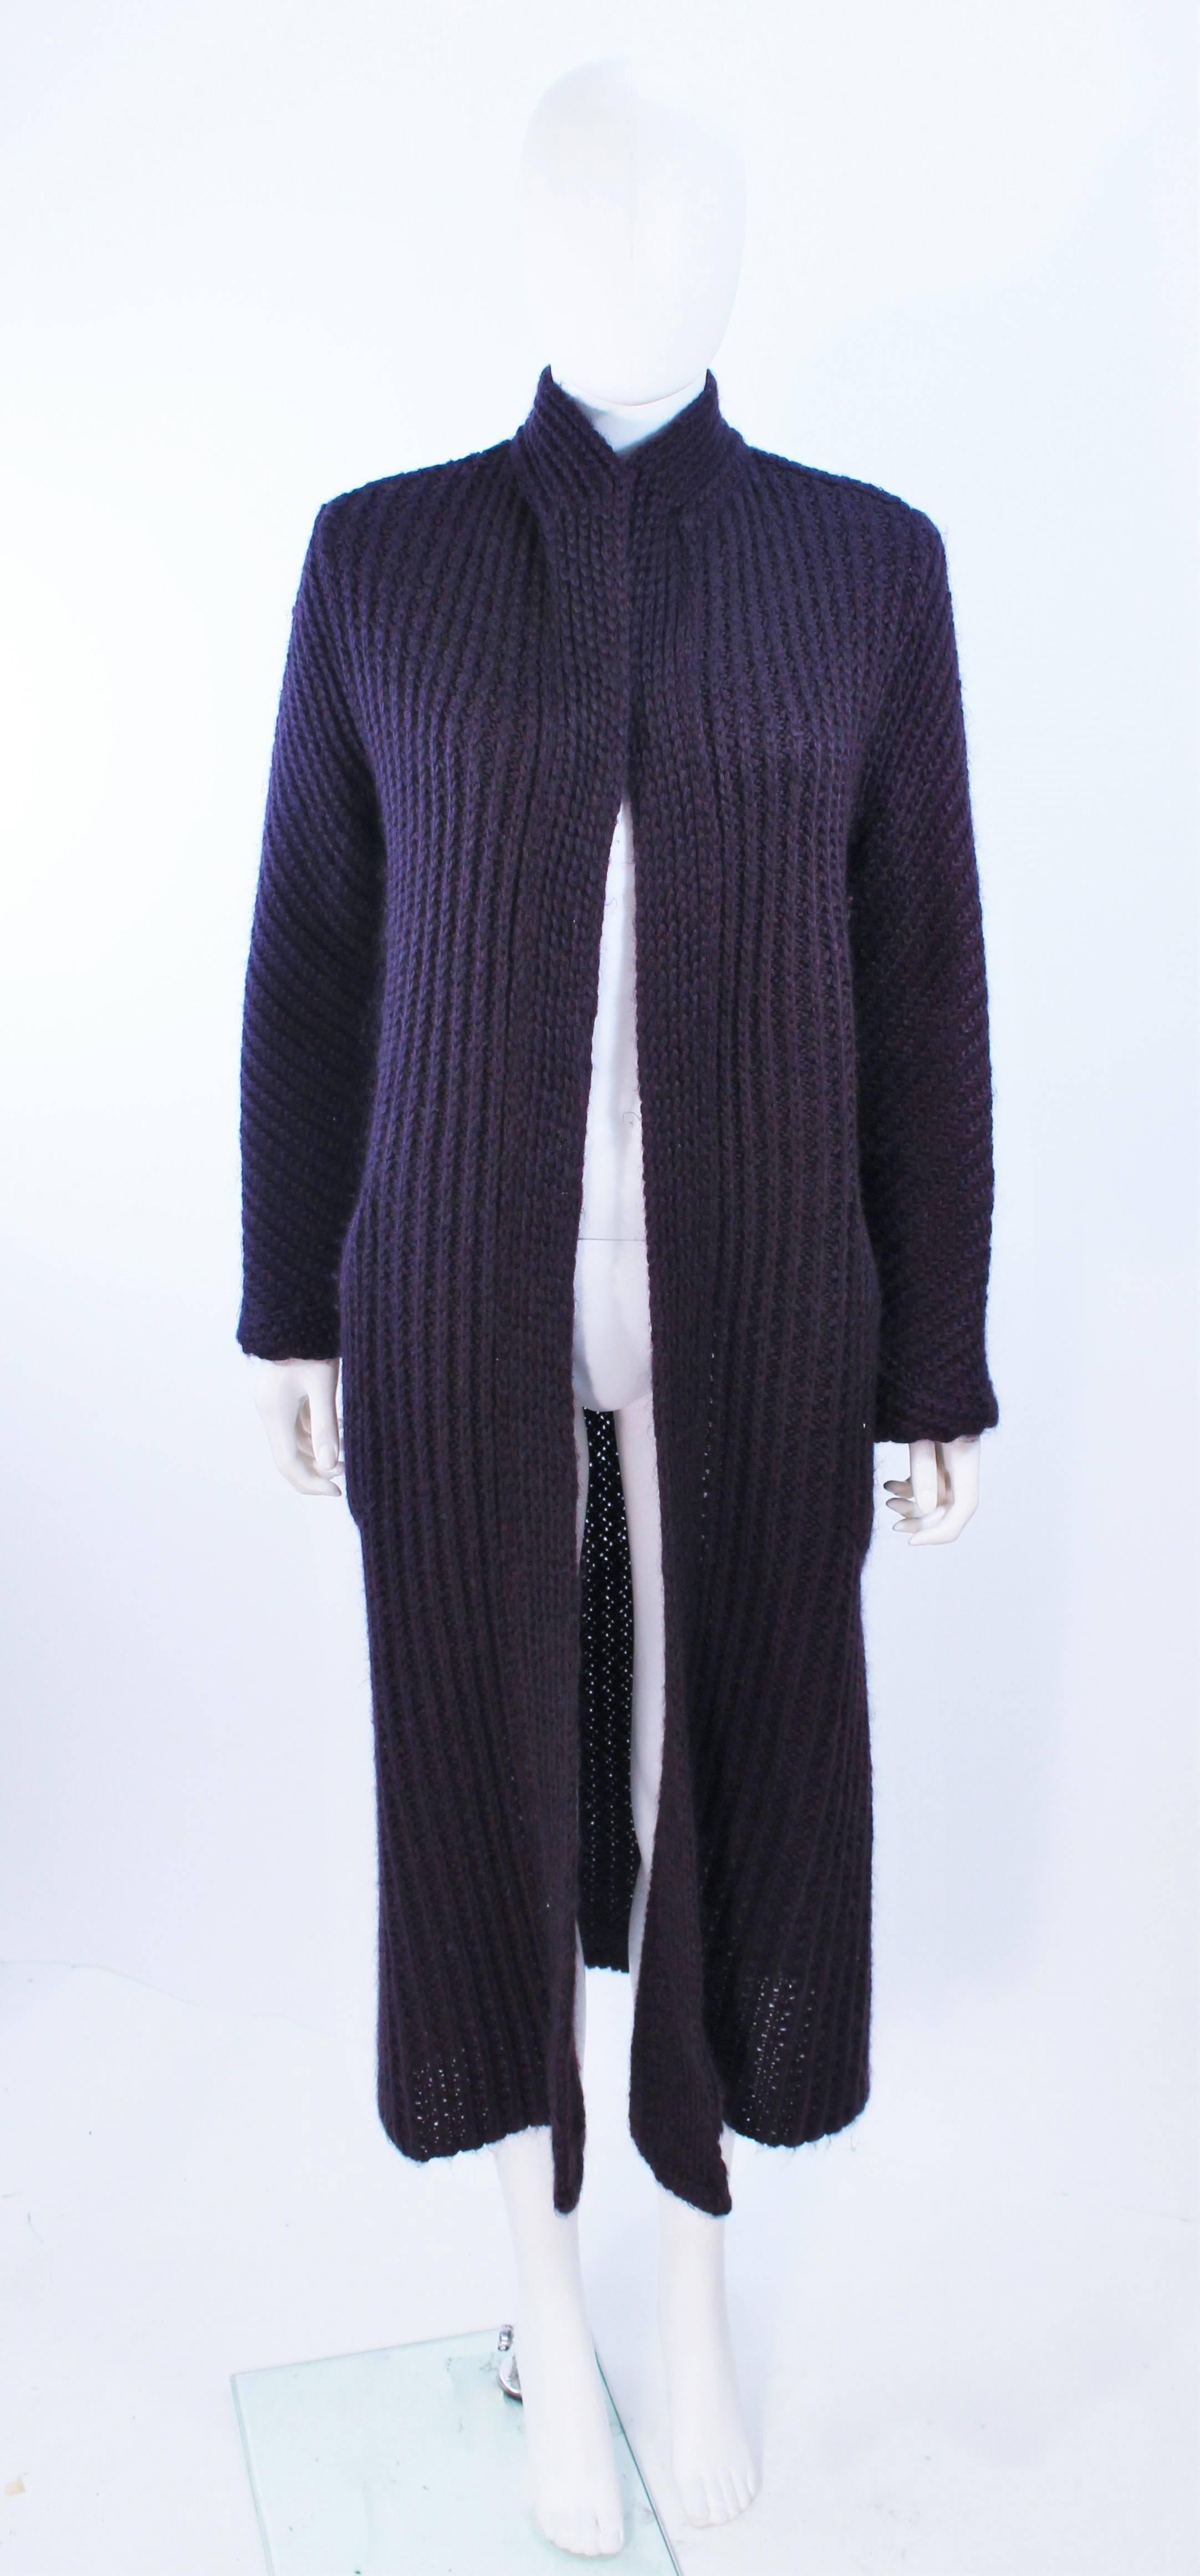 This Missoni purple wool full length sweater is composed of a purple wool. Features an open style. In excellent vintage condition.

**Please cross-reference measurements for personal accuracy. Size in description box is an estimation.

Measures